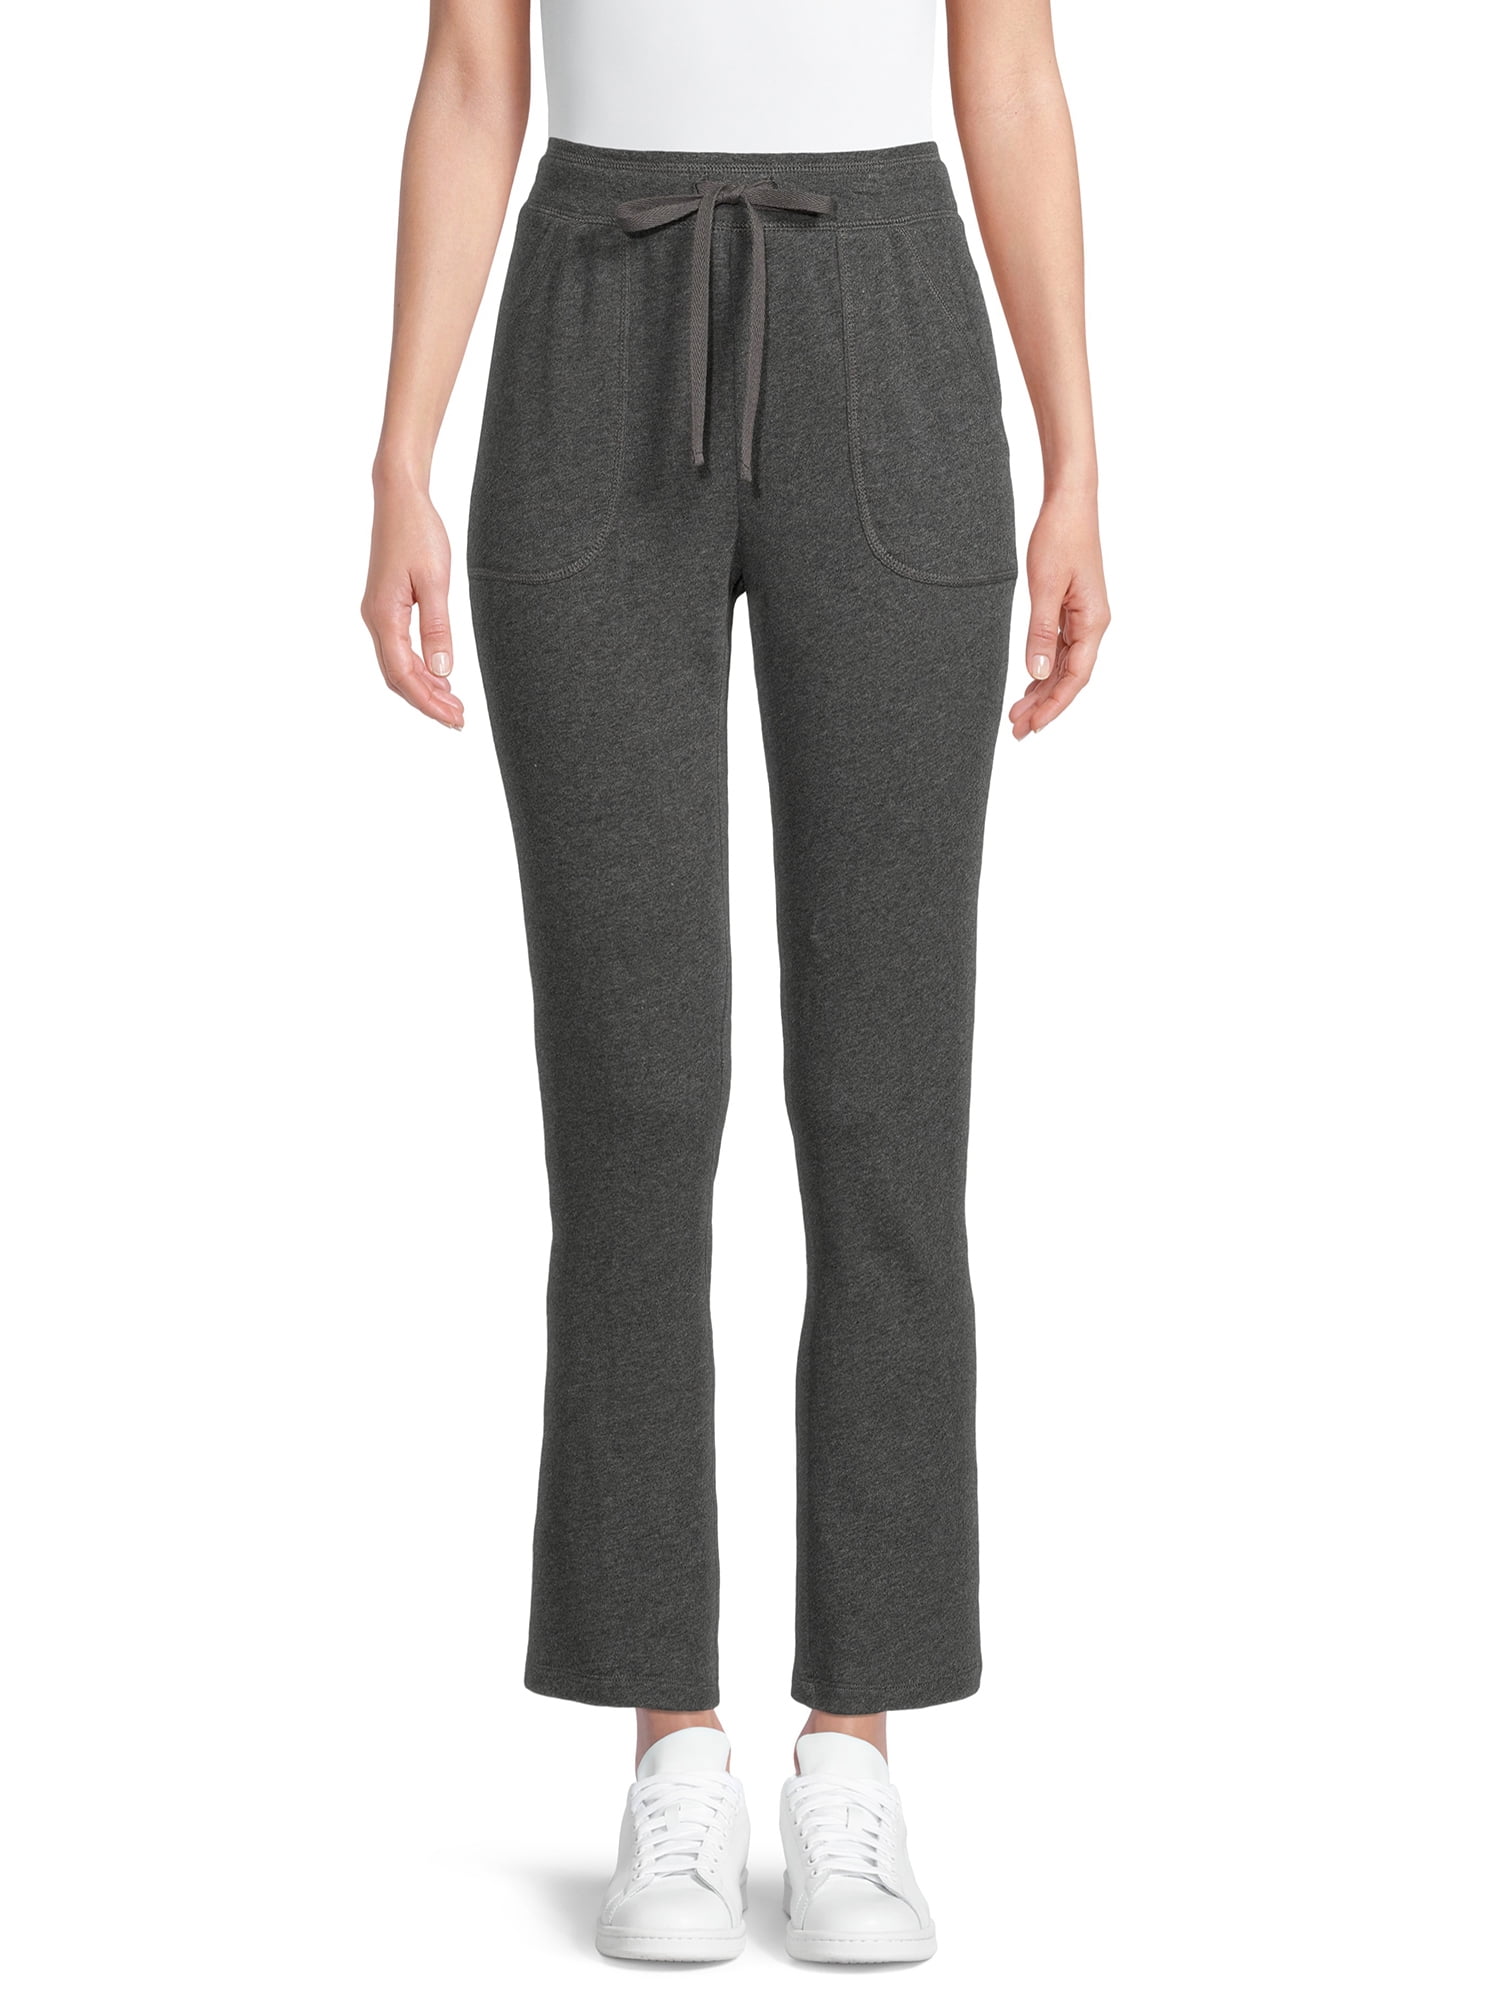 RealSize Women's French Terry Cloth Pants with Pockets - Walmart.com